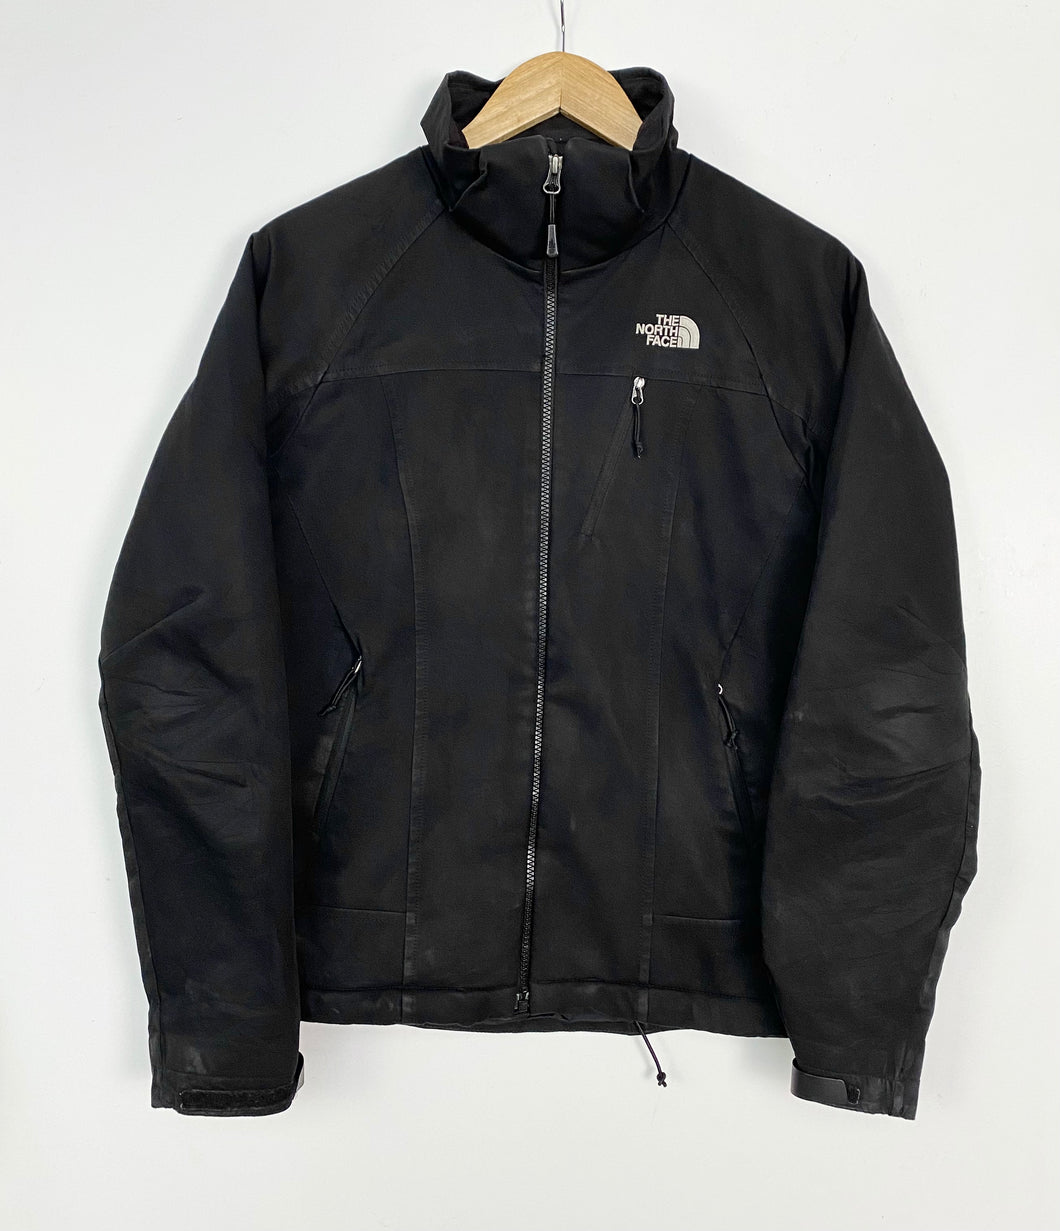 Women’s The North Face jacket (S)